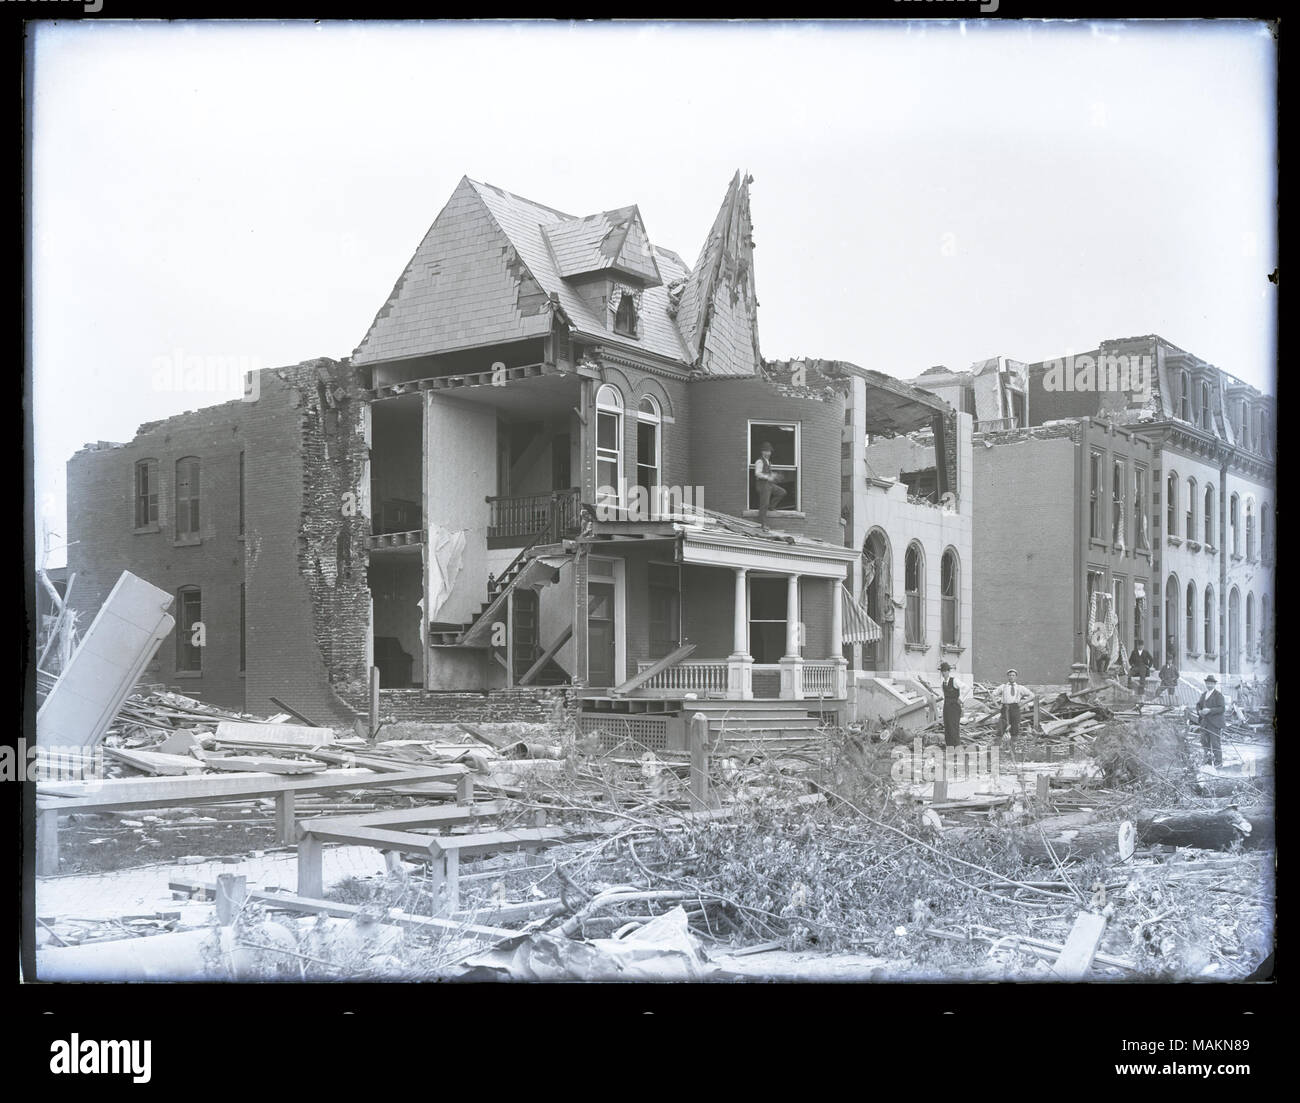 Horizontal, black and white photograph showing destruction in the Lafayette Park neighborhood after a tornado, probably the 1896 tornado. Photograph was probably taken at the corner of Park Avenue and Mississippi Avenue. Five houses have had parts of their roofs, walls, and windows destroyed. An interior staircase of one home can be seen. Piles of rubble and fallen trees can be seen throughout the photograph. Several men are standing amid rubble on the right. Title: Destruction in the Lafayette Park neighborhood after tornado, probably the 1896 tornado.  . 1896. Stock Photo